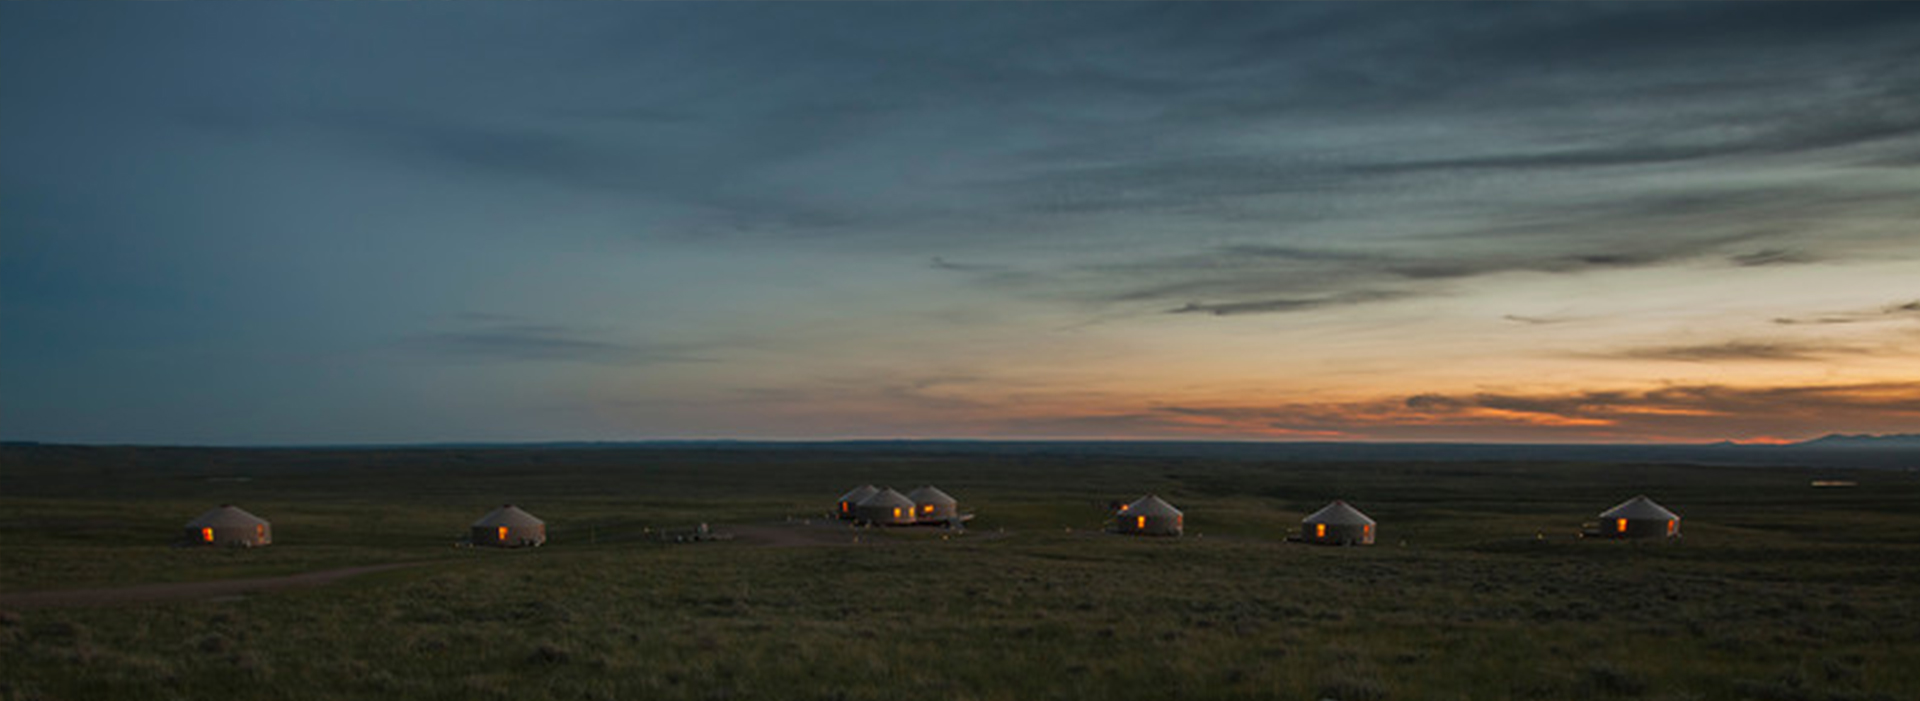 8 shelter designs yurts on the plains with a sunset sky